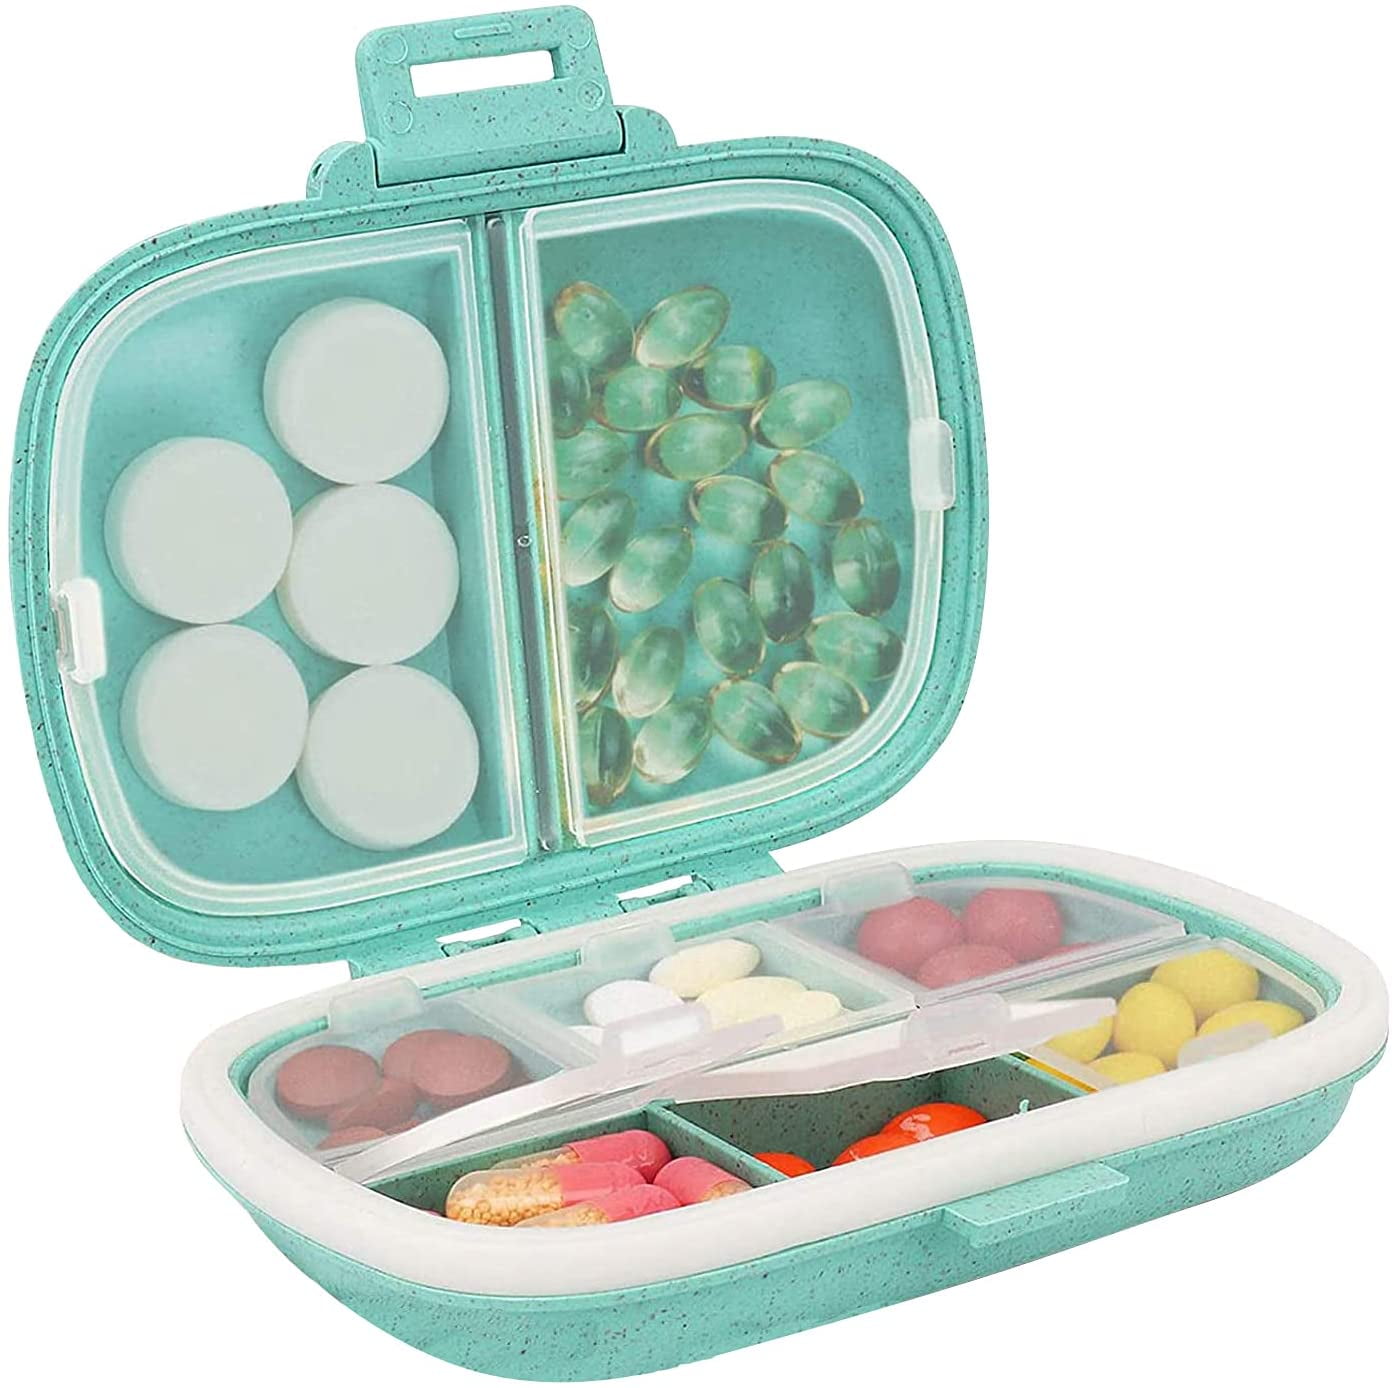 Pill Holder for Purse, Portable Small Travel Medicine Organizer with Compartments, Moisture Proof Cute Pill Boxes Jewelry Case Cod Liver Oil Holder